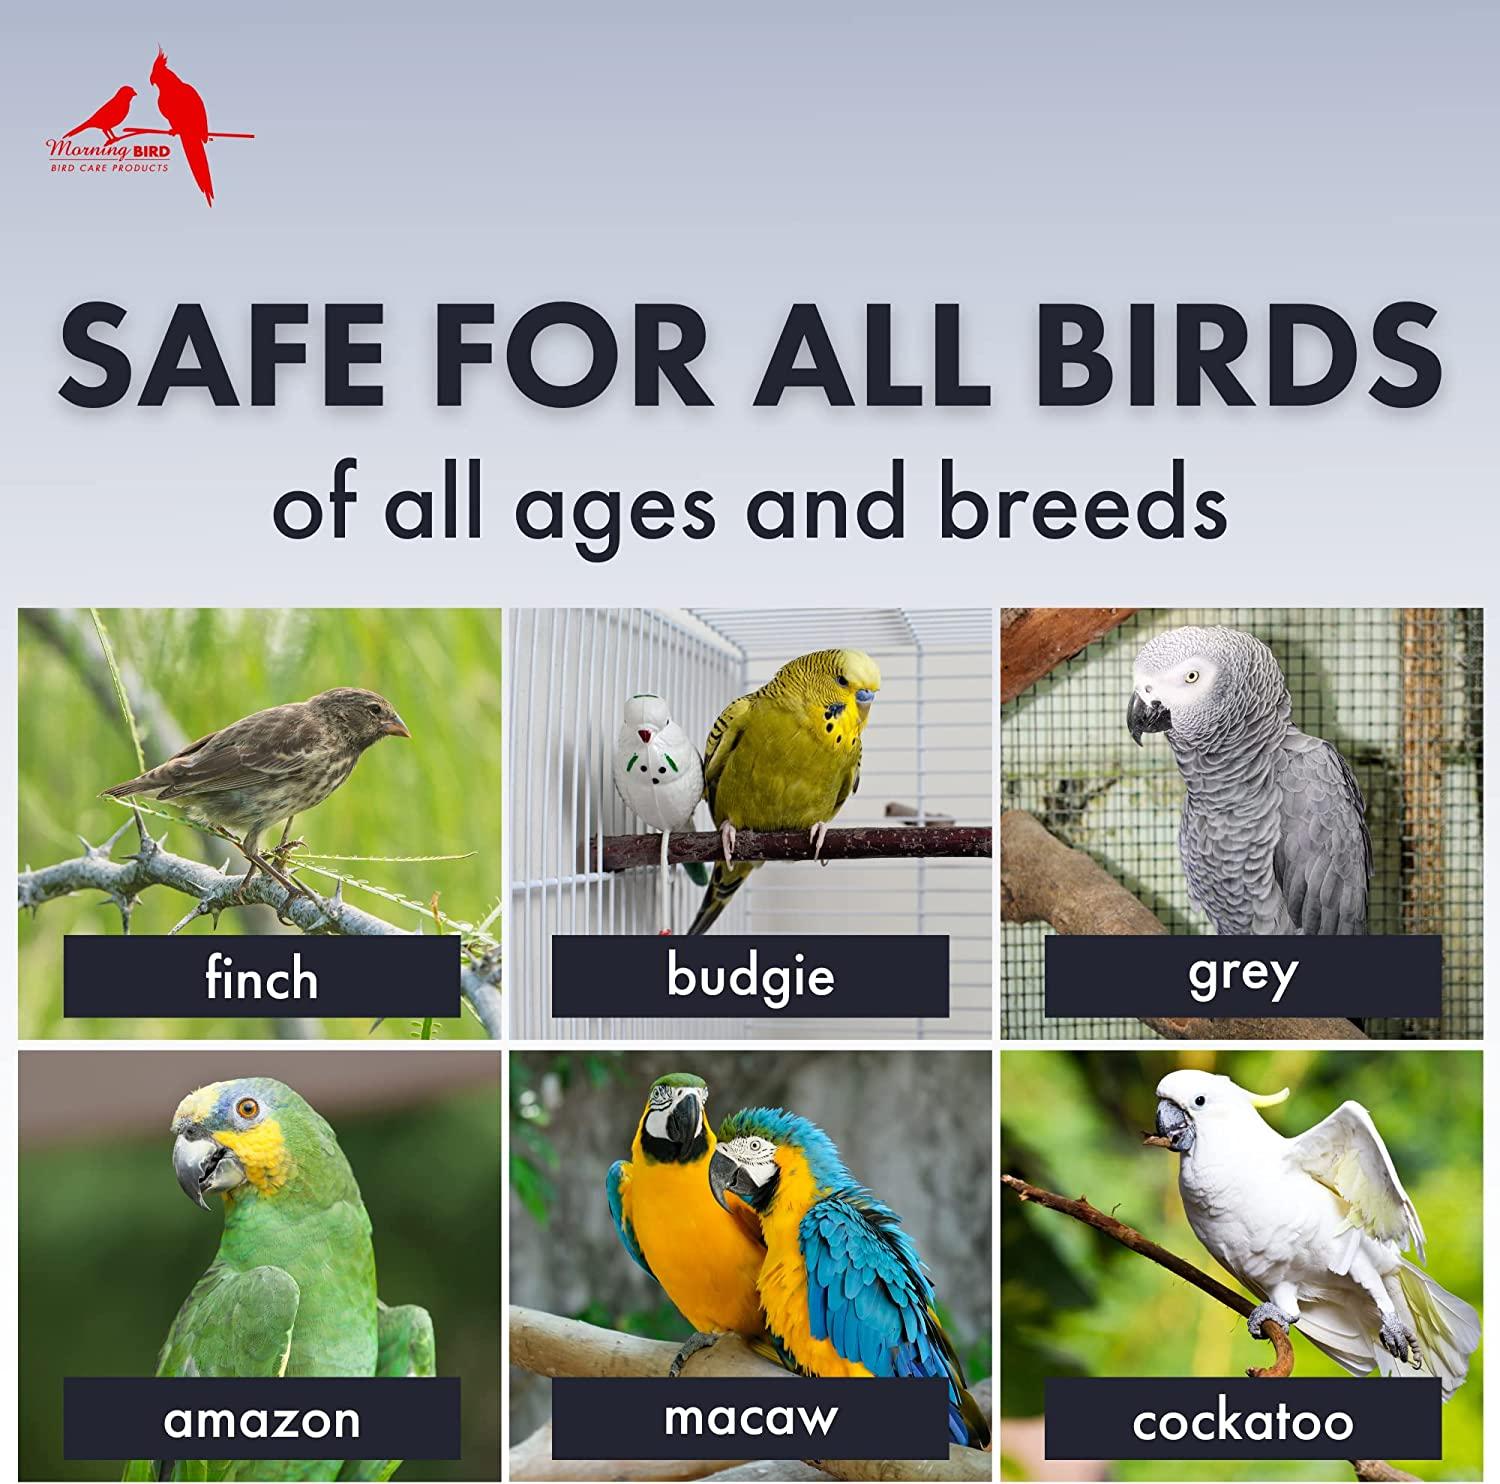 All Bird Products